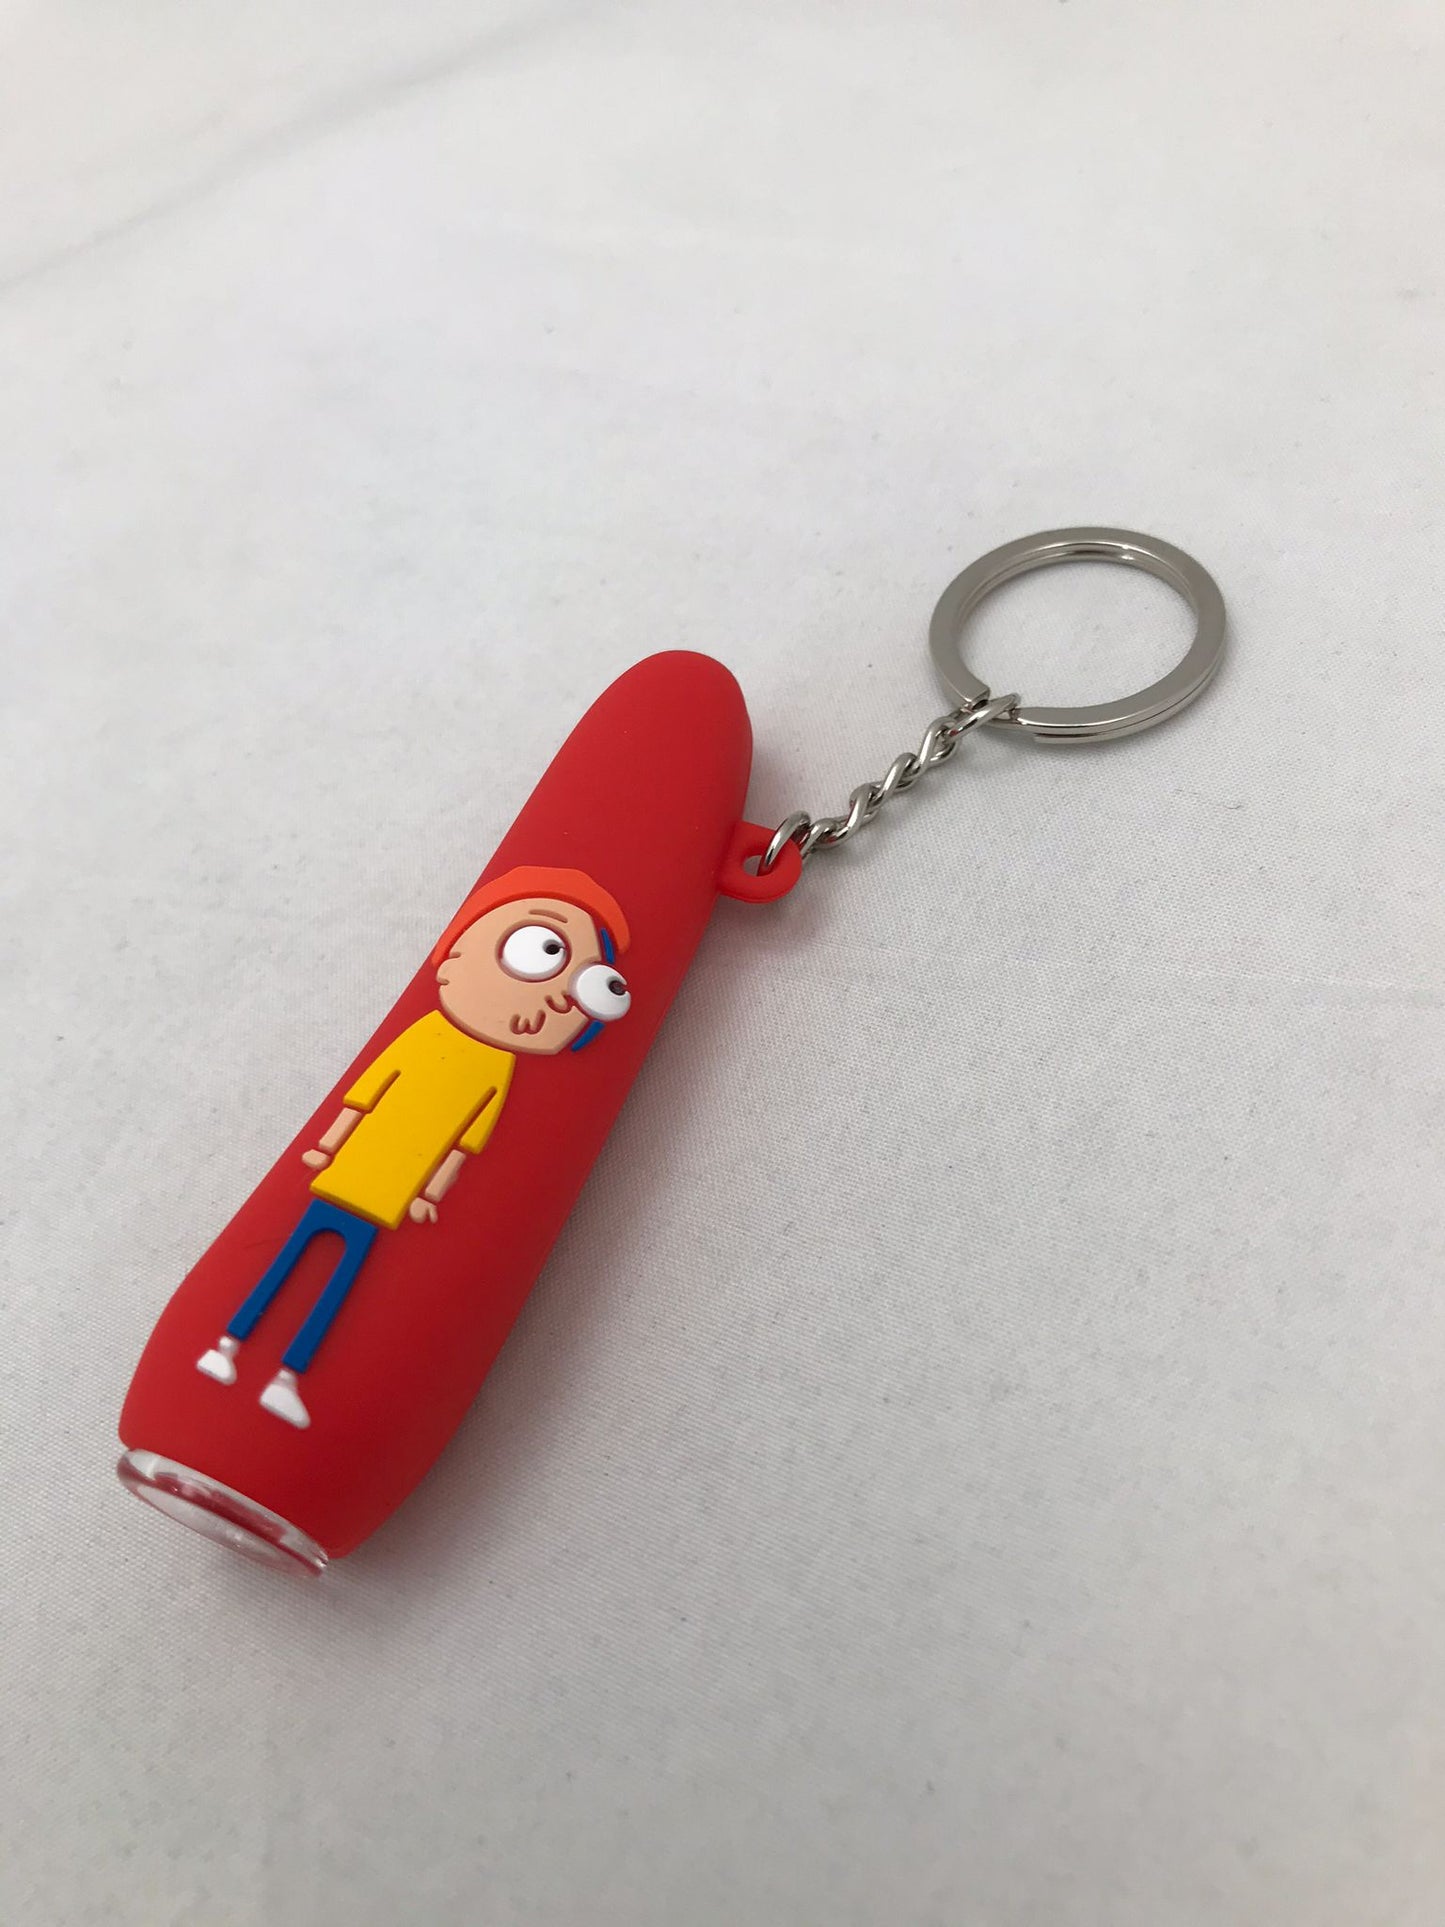 Silicon keychain pipe MORTY